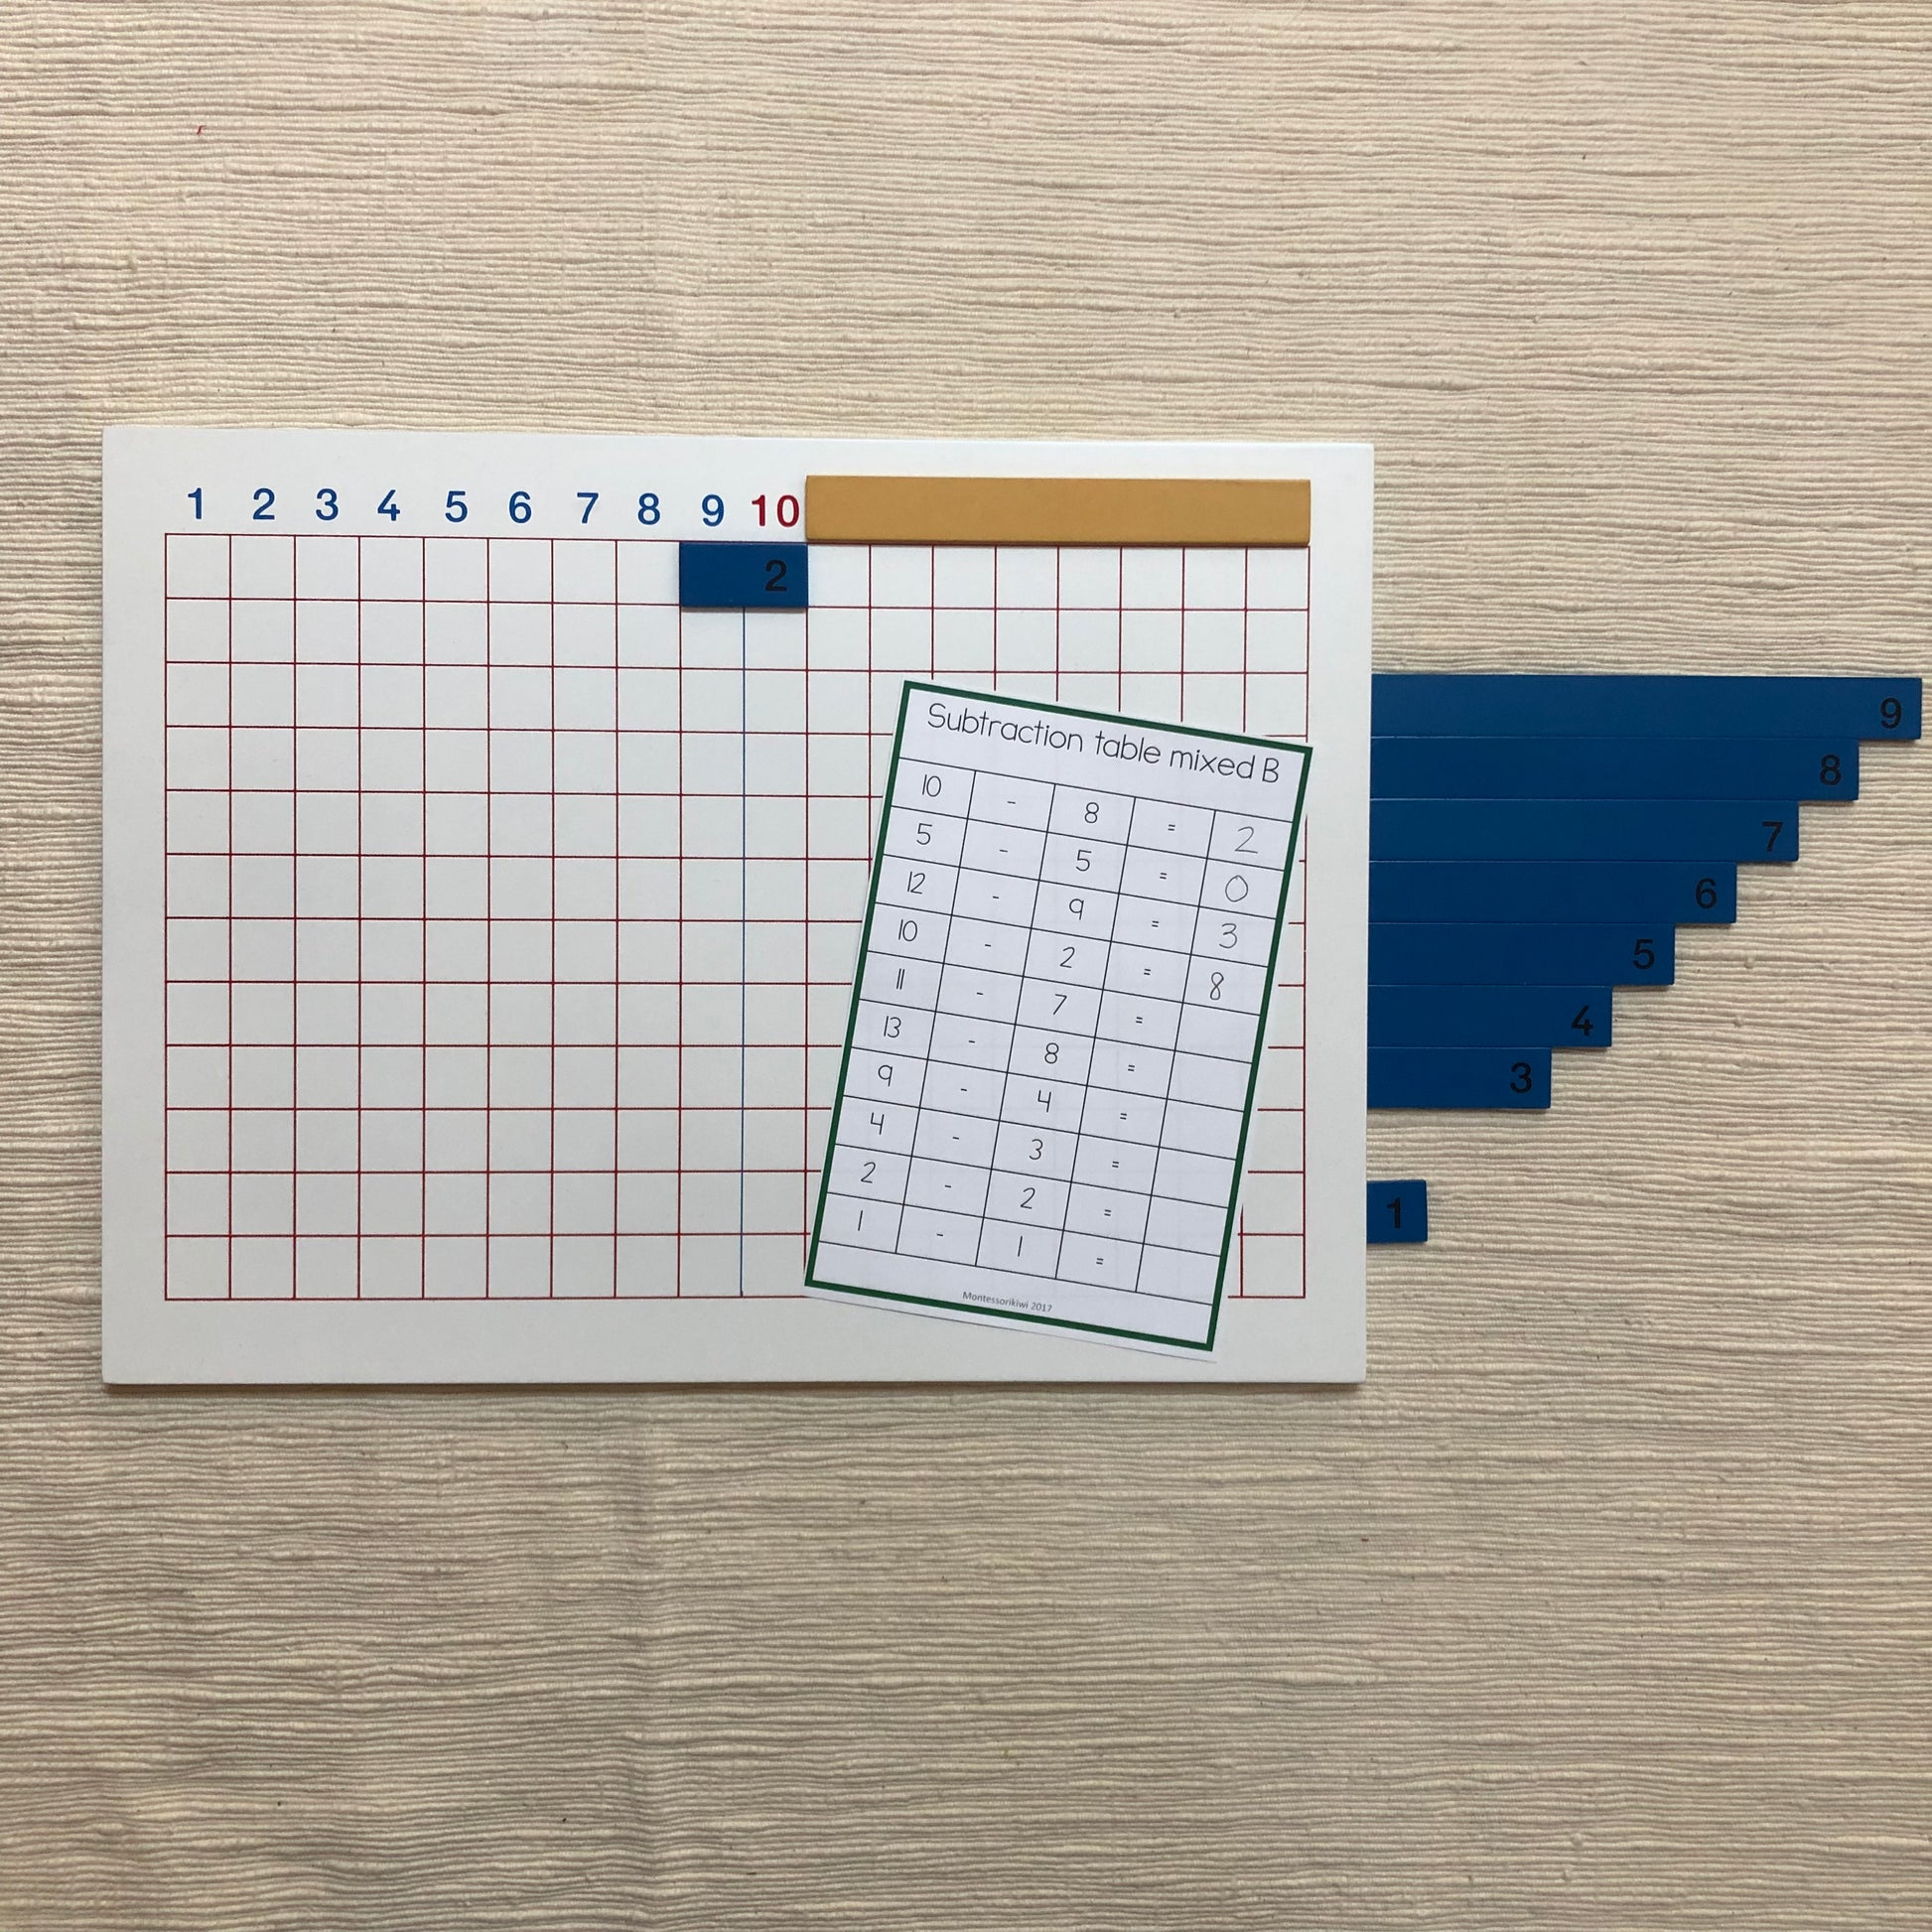 Subtraction Charts Tables Booklets - montessorikiwi